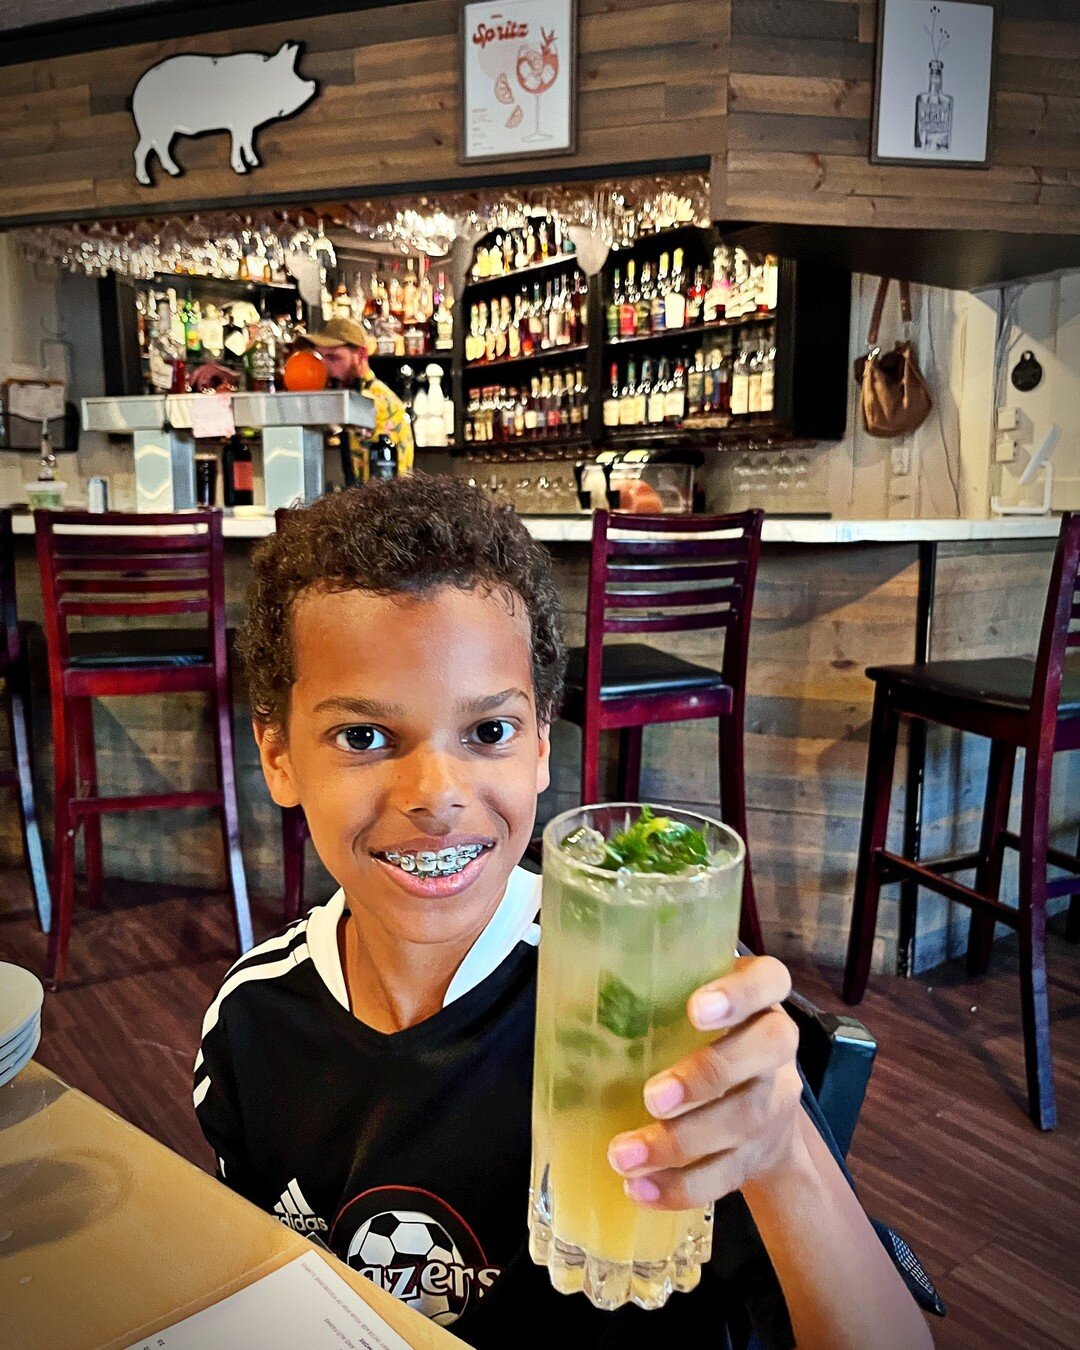 Celebrating the big win with a mocktail!

#soccerlife #mocktail #mojito